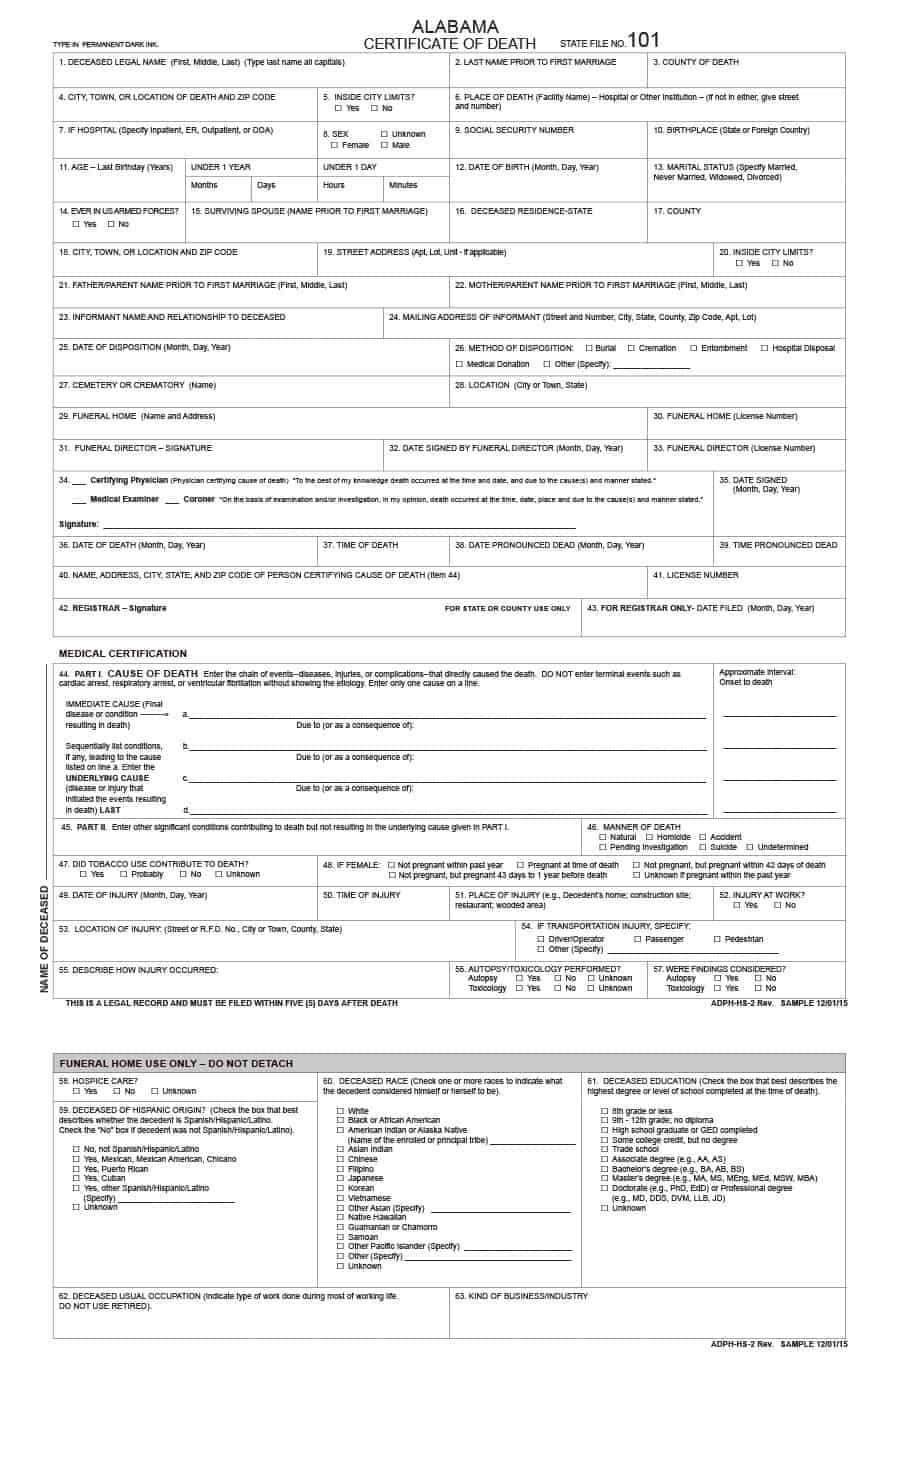 37 Blank Death Certificate Templates [100% Free] ᐅ Template Lab Pertaining To Blank Social Security Card Template Download